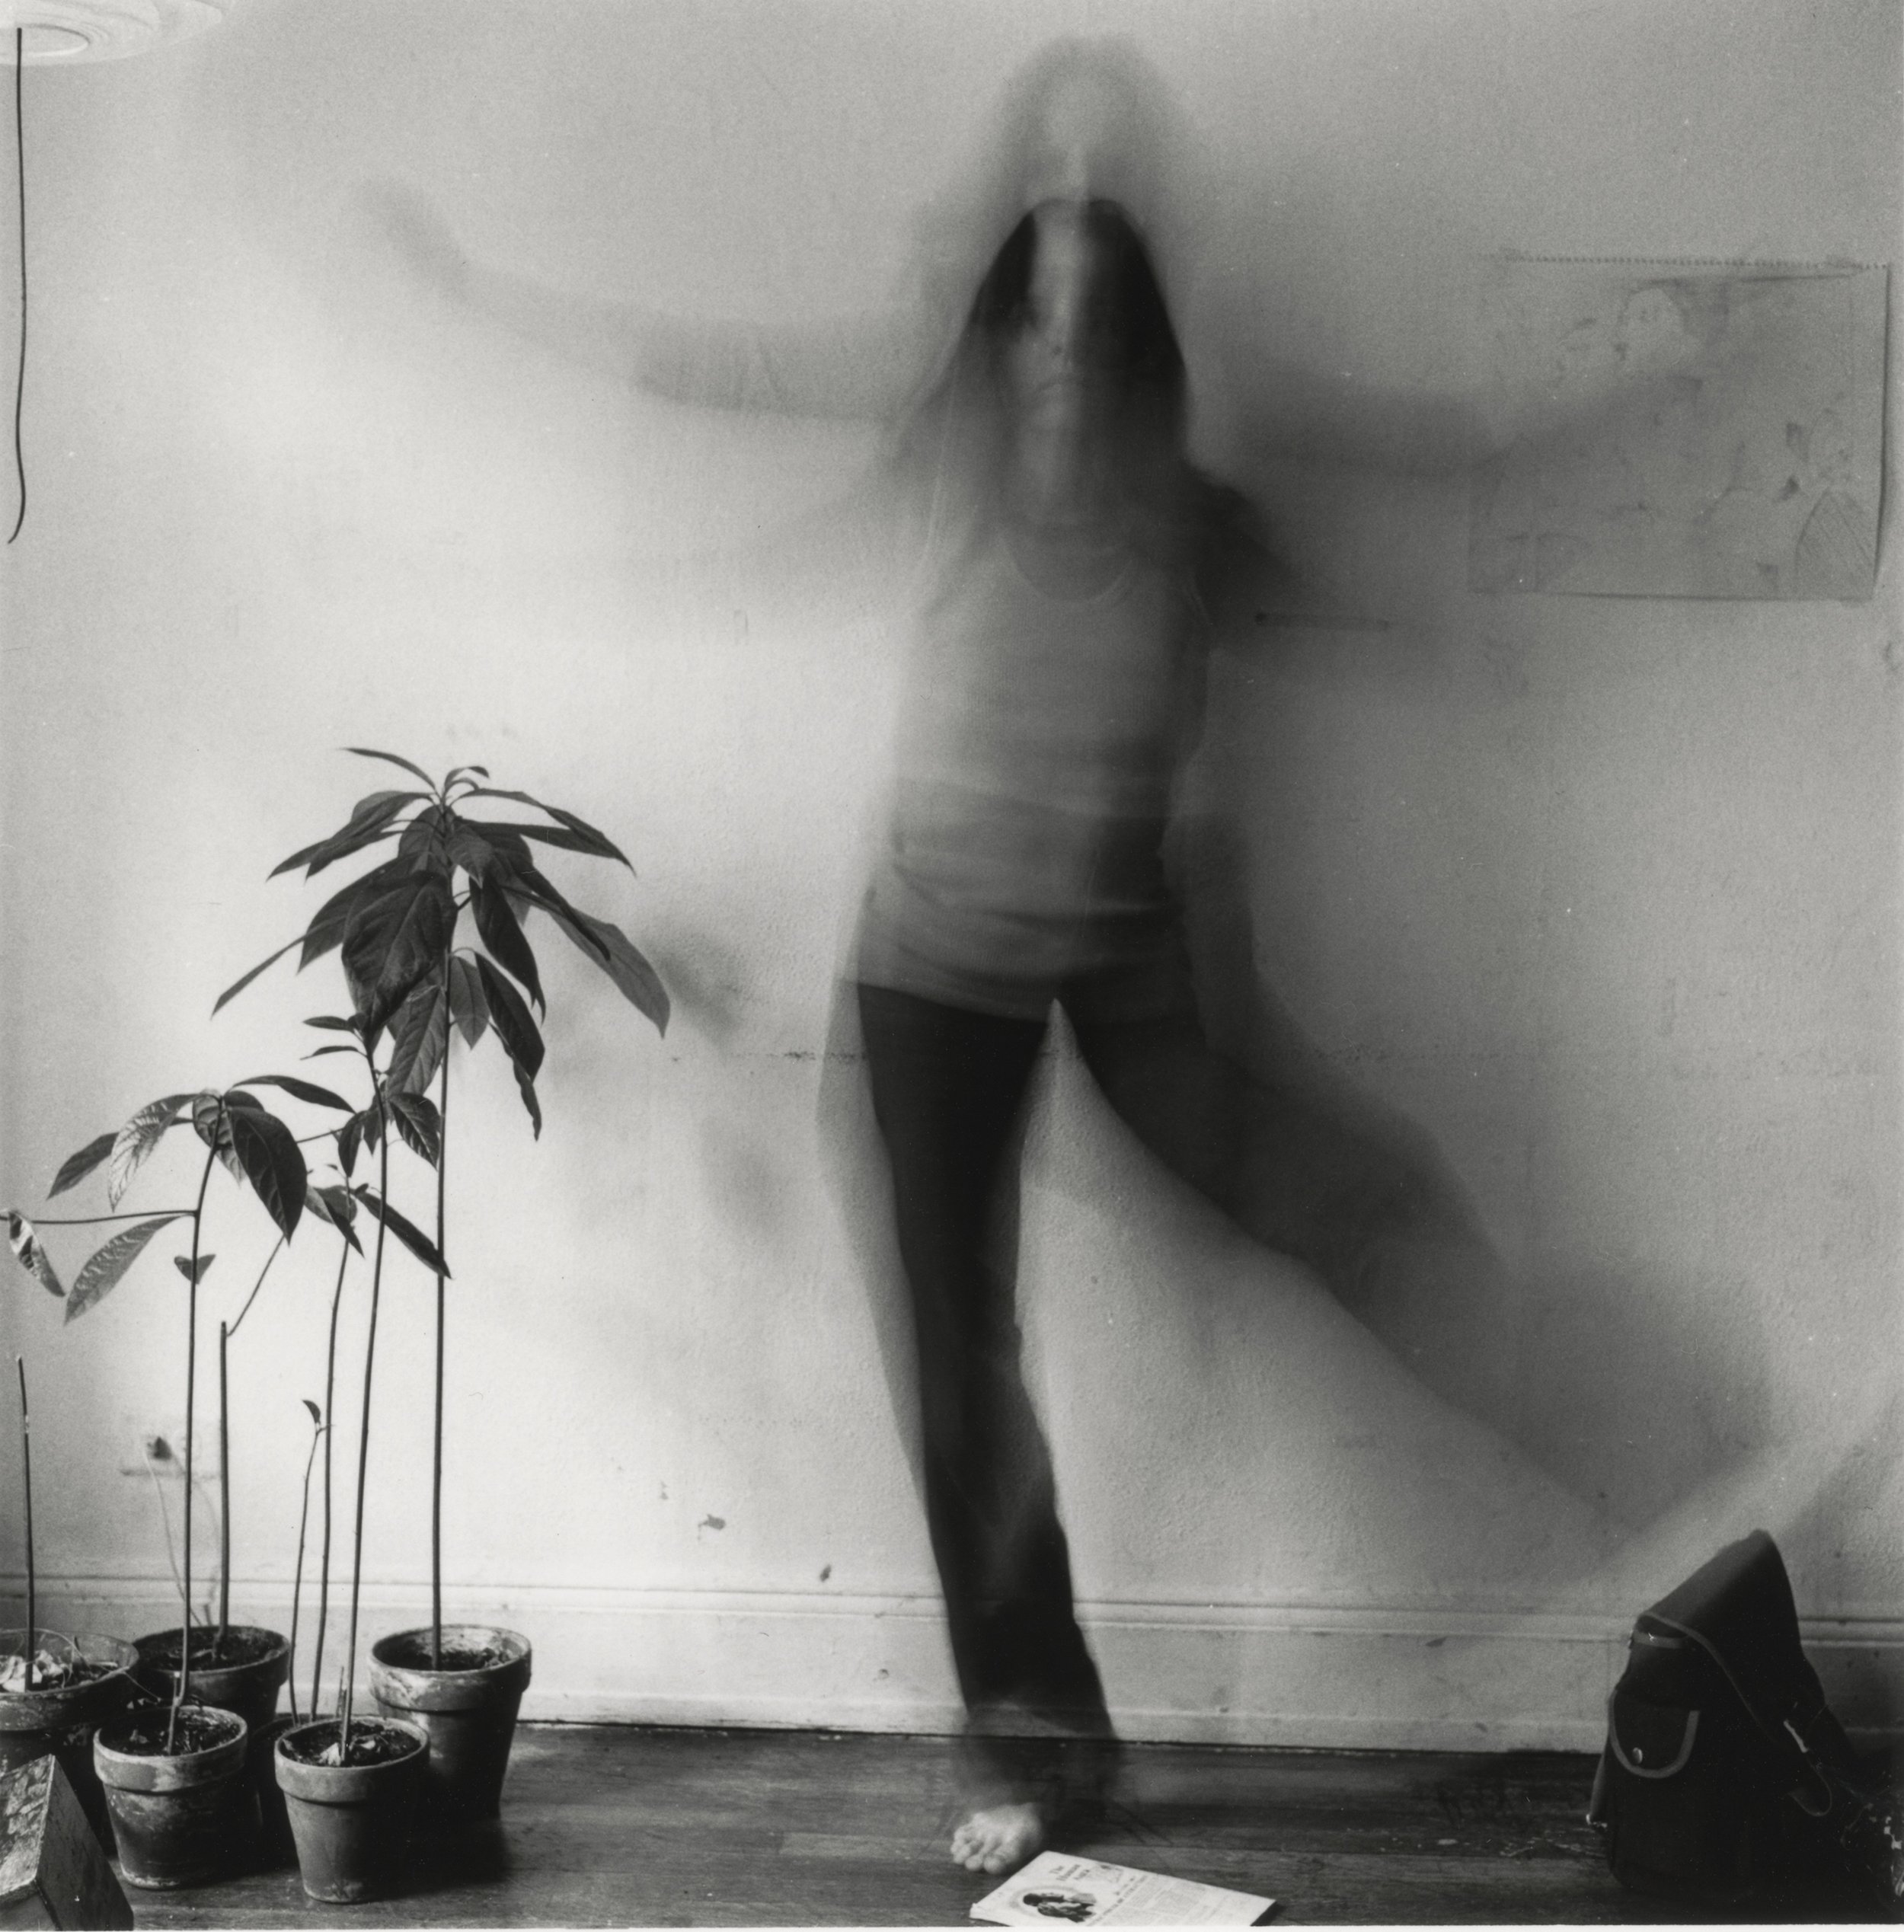  Melissa Shook (United States, 1939–2020),  May 6, 1973  from the series  Daily Self-Portraits 1972–197 3, 1973, gelatin silver print, 4 3/8 x 4 3/8 inches. Portland Museum of Art, Maine. Museum purchase with support from the Irving B. Ellis Fund, Th